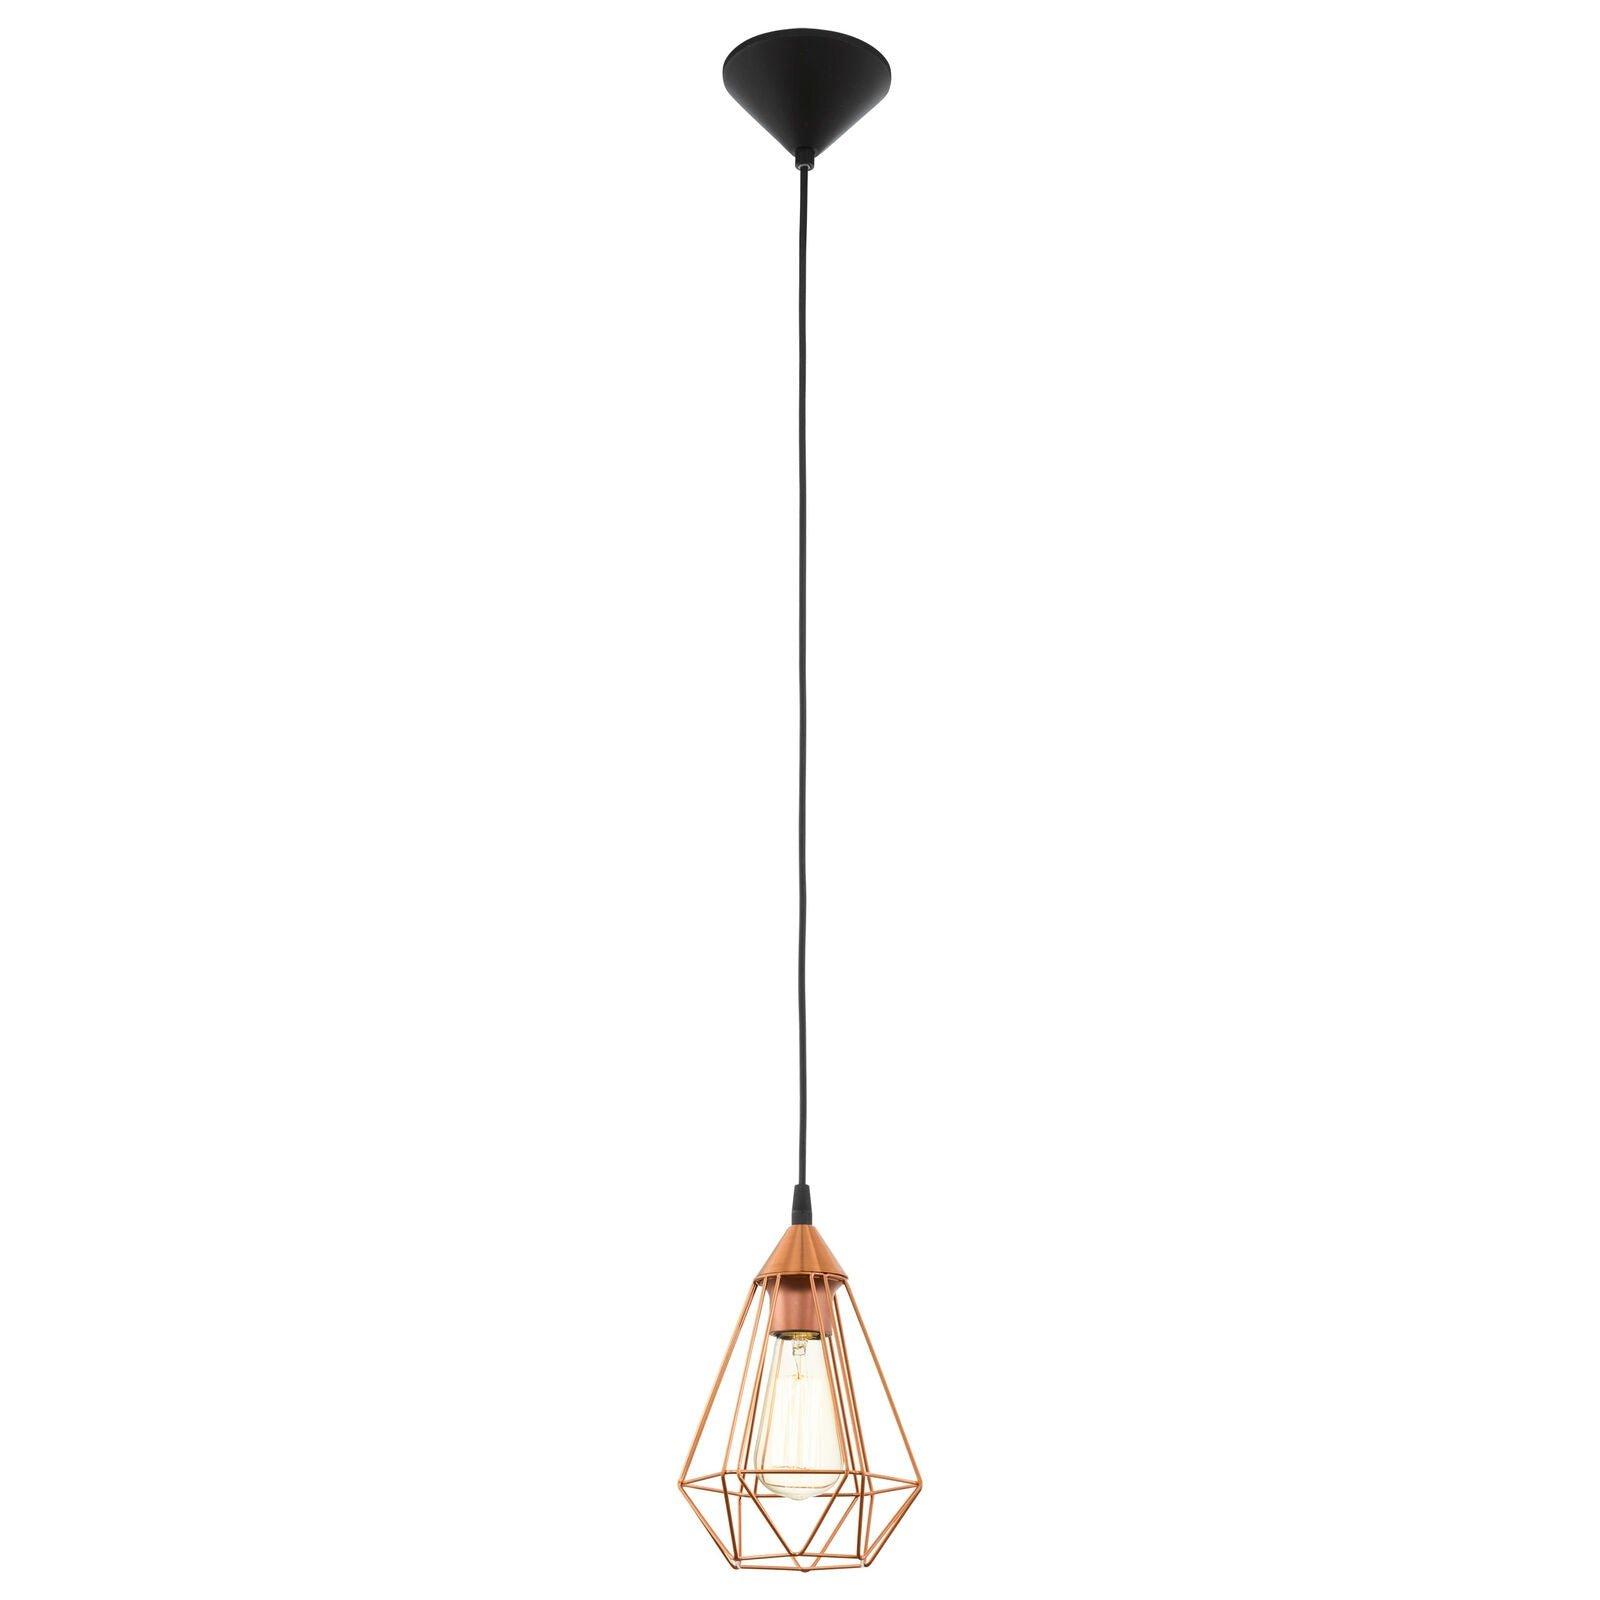 Hanging Ceiling Pendant Light Copper Wire Cage 1 x E27 Hallway Feature Lamp